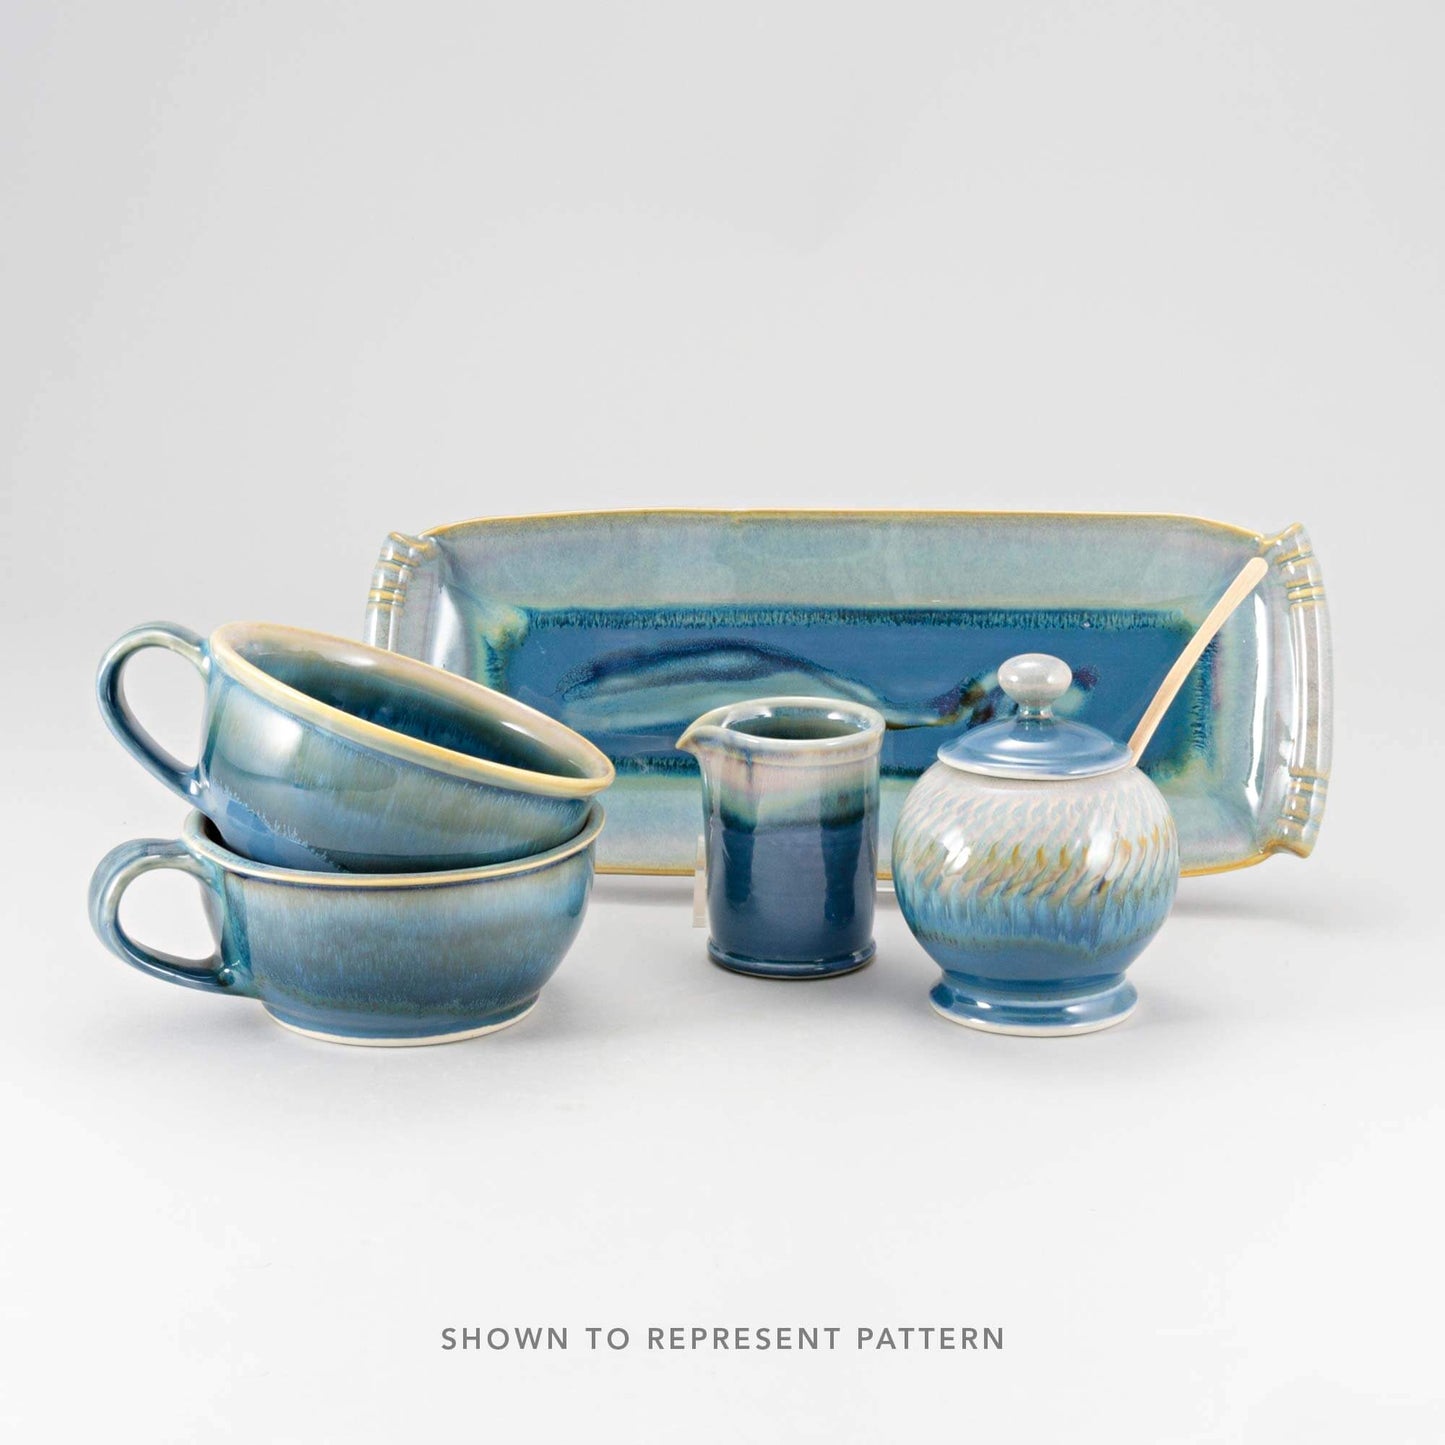 Handmade Pottery xx in Blue Oribe pattern made by Georgetown Pottery in Maine